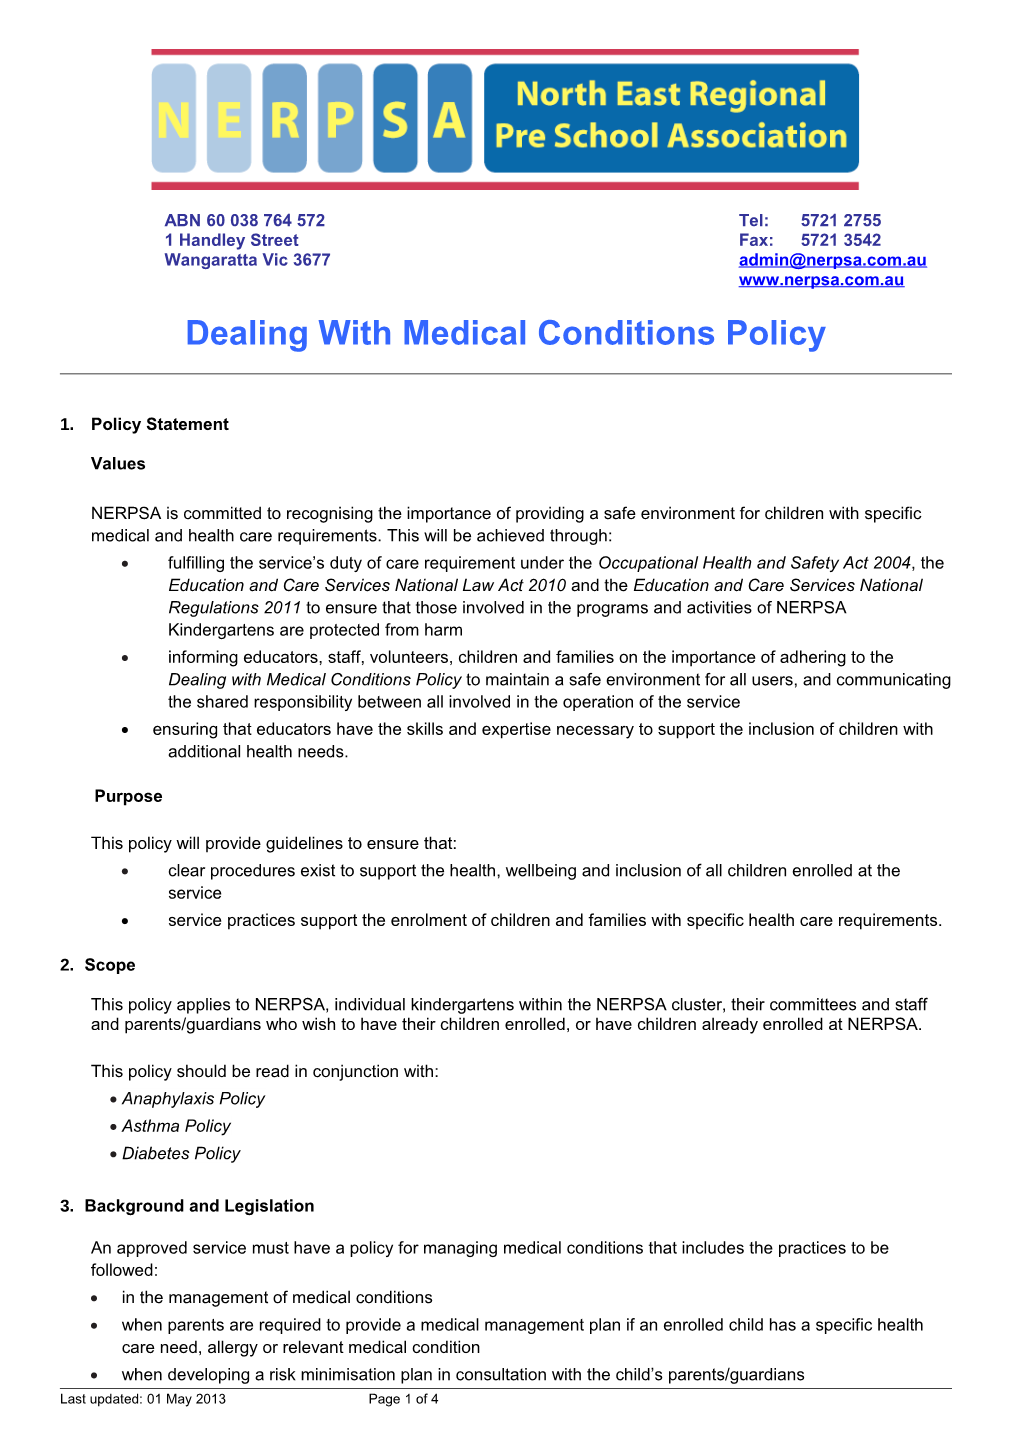 NERPSA Dealing with Medical Conditions Policy